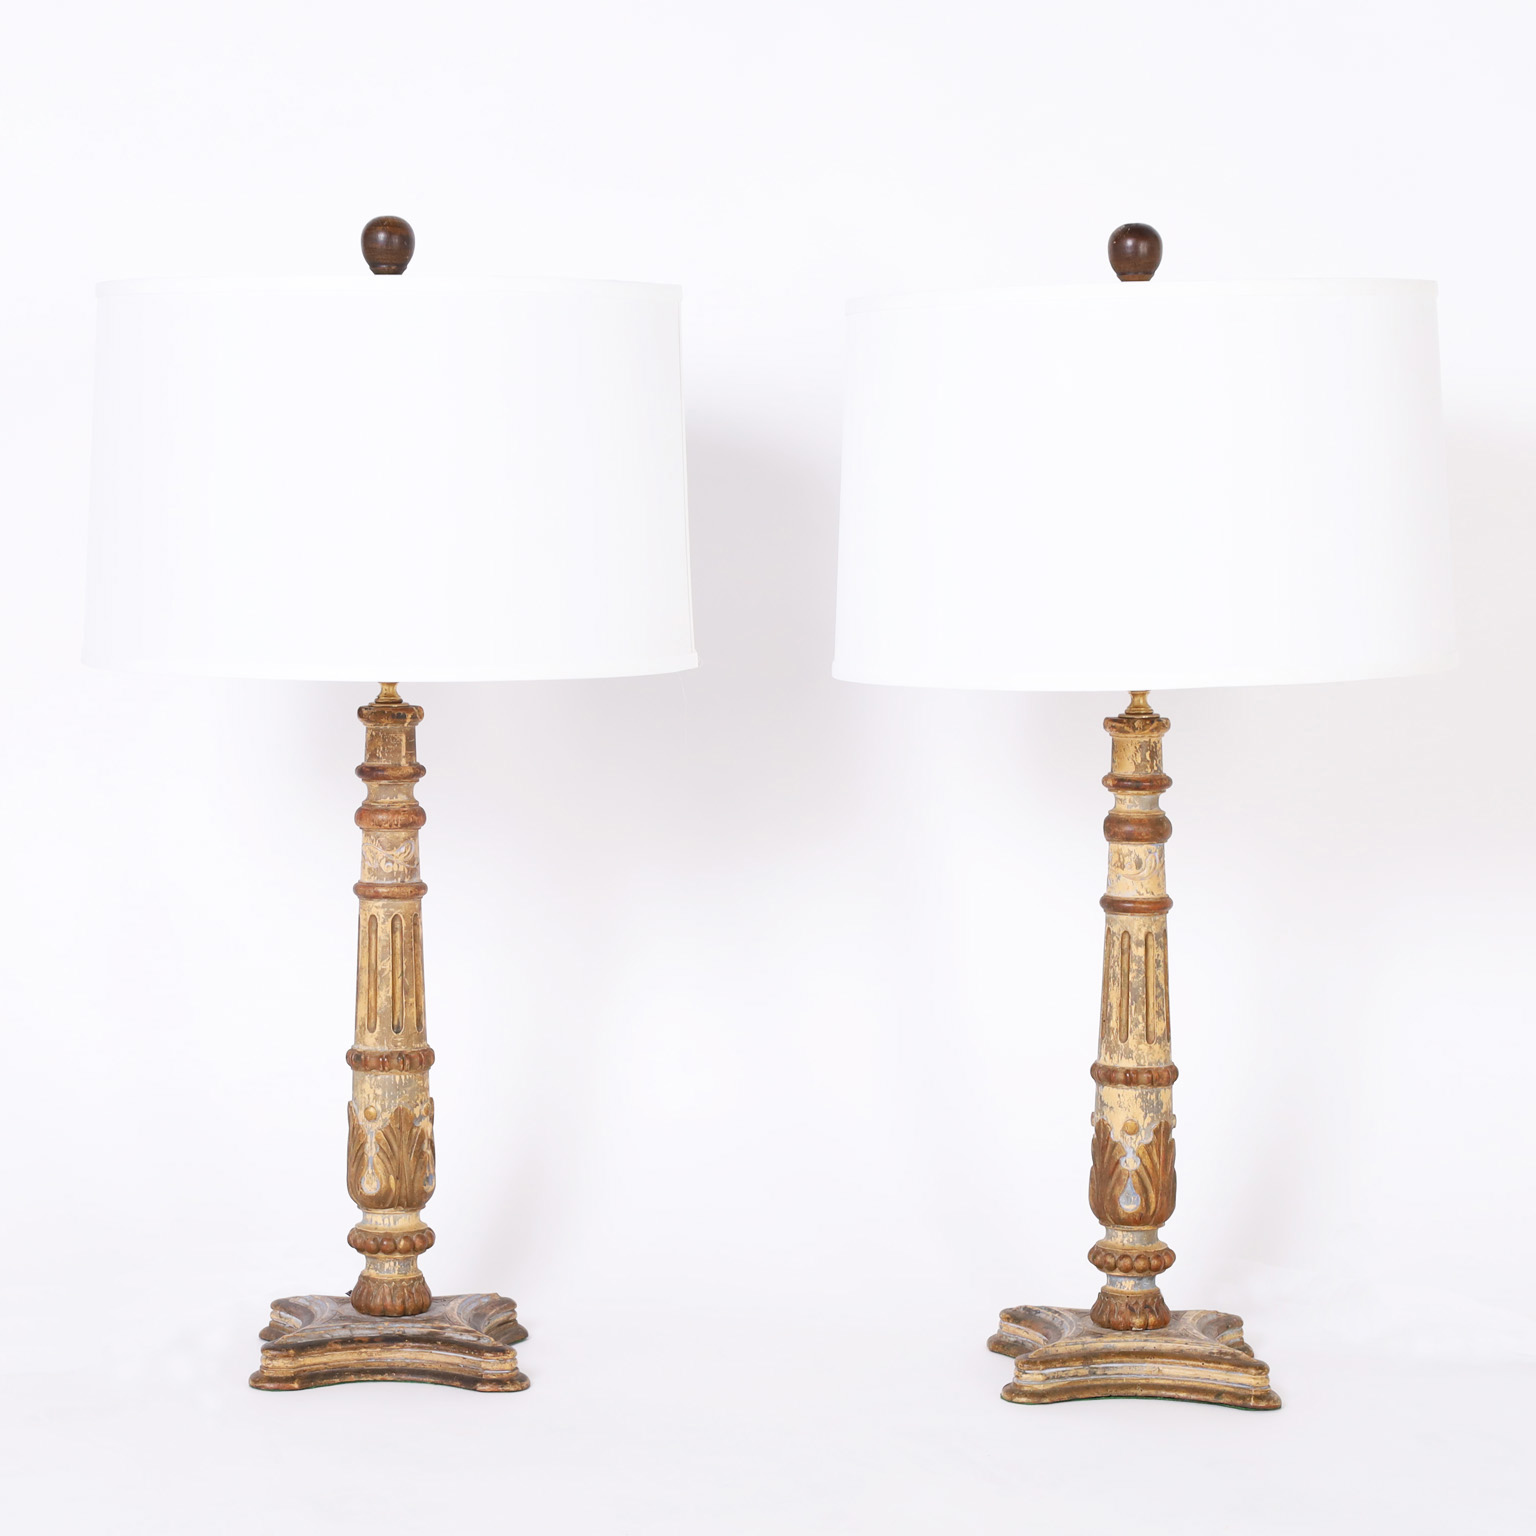 Pair of Antique Painted Italian Carved Wood Table Lamps